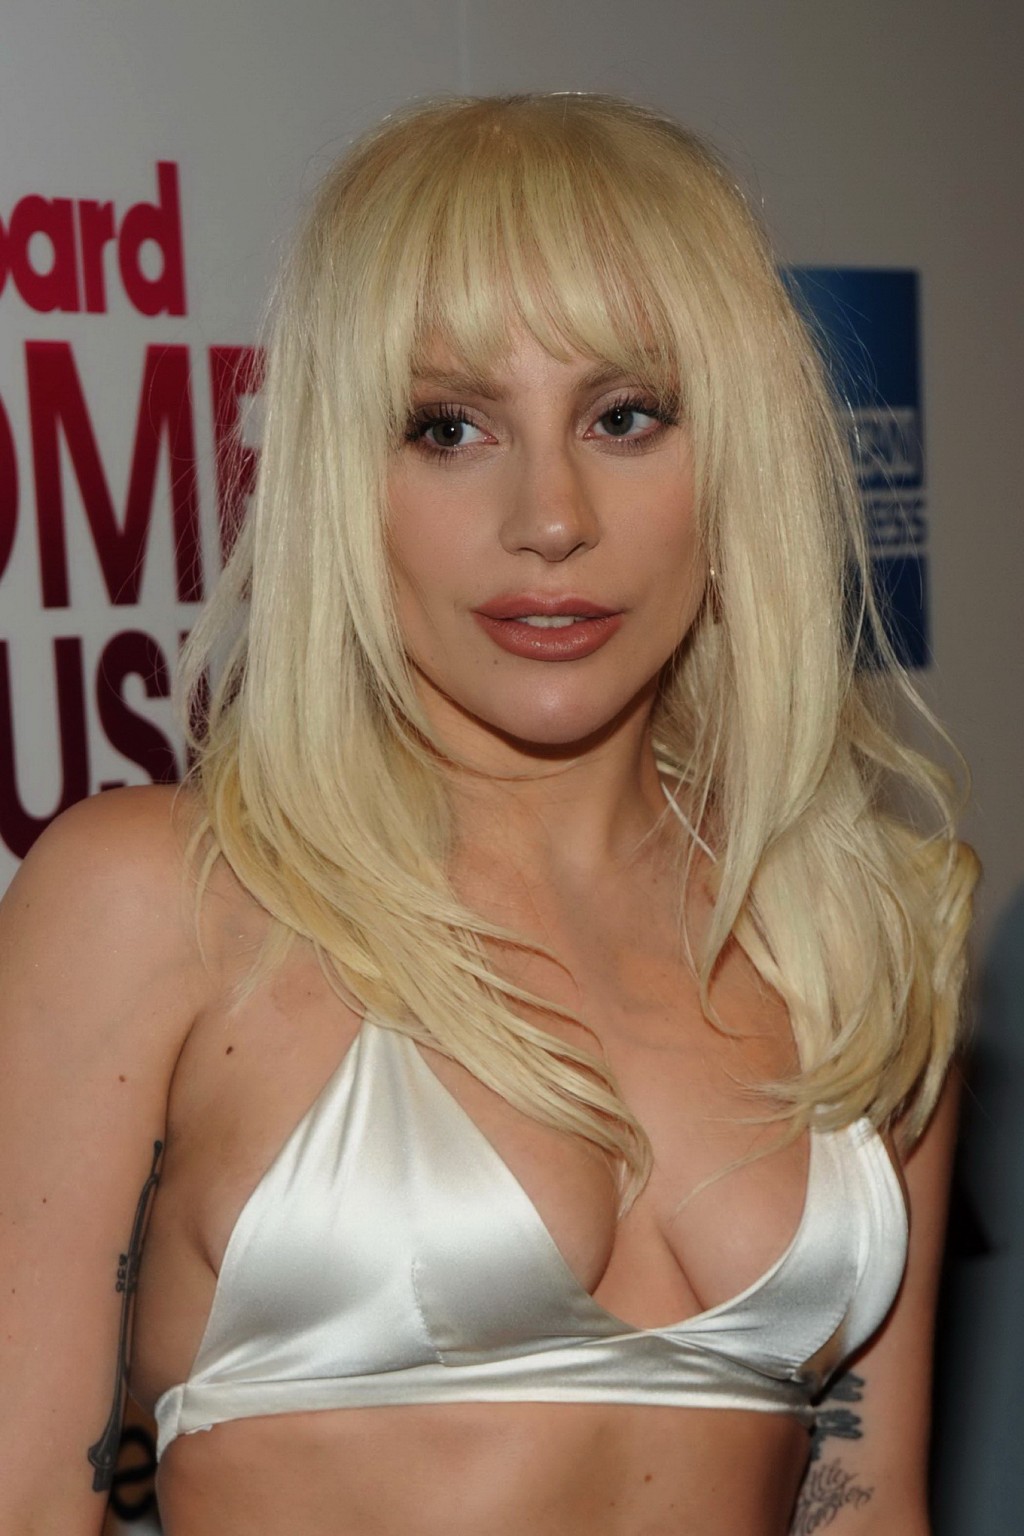 Lady Gaga busty in tiny white bra and skirt in public #75148650